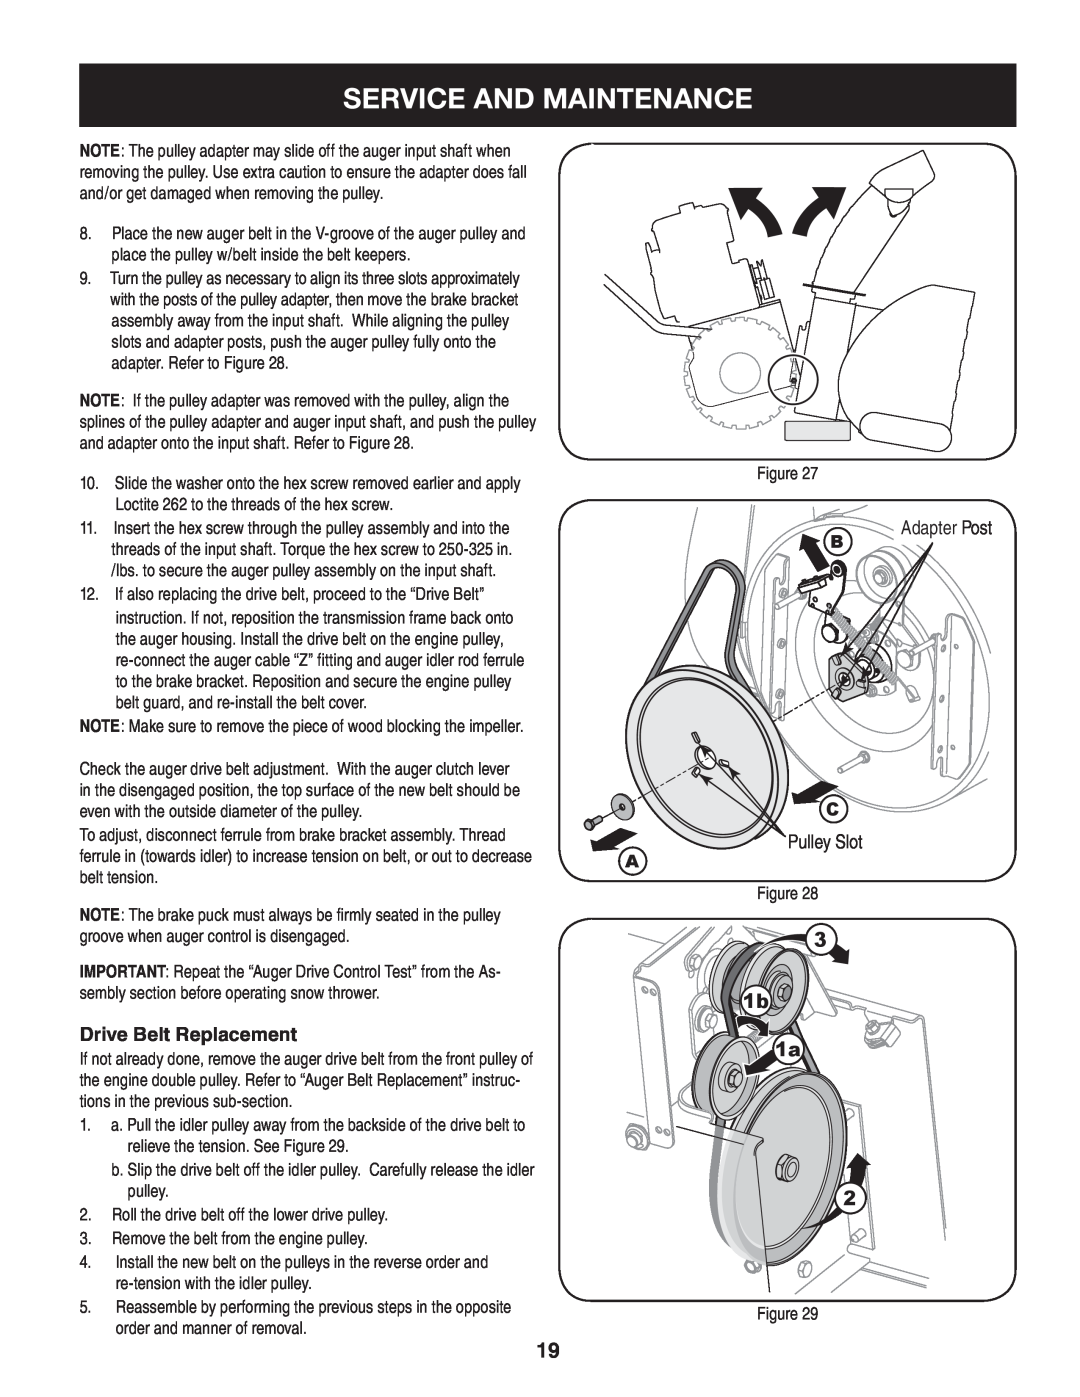 Craftsman 247.88045 manual Service And Maintenance, Drive Belt Replacement, Pulley Slot, 1b 1a 